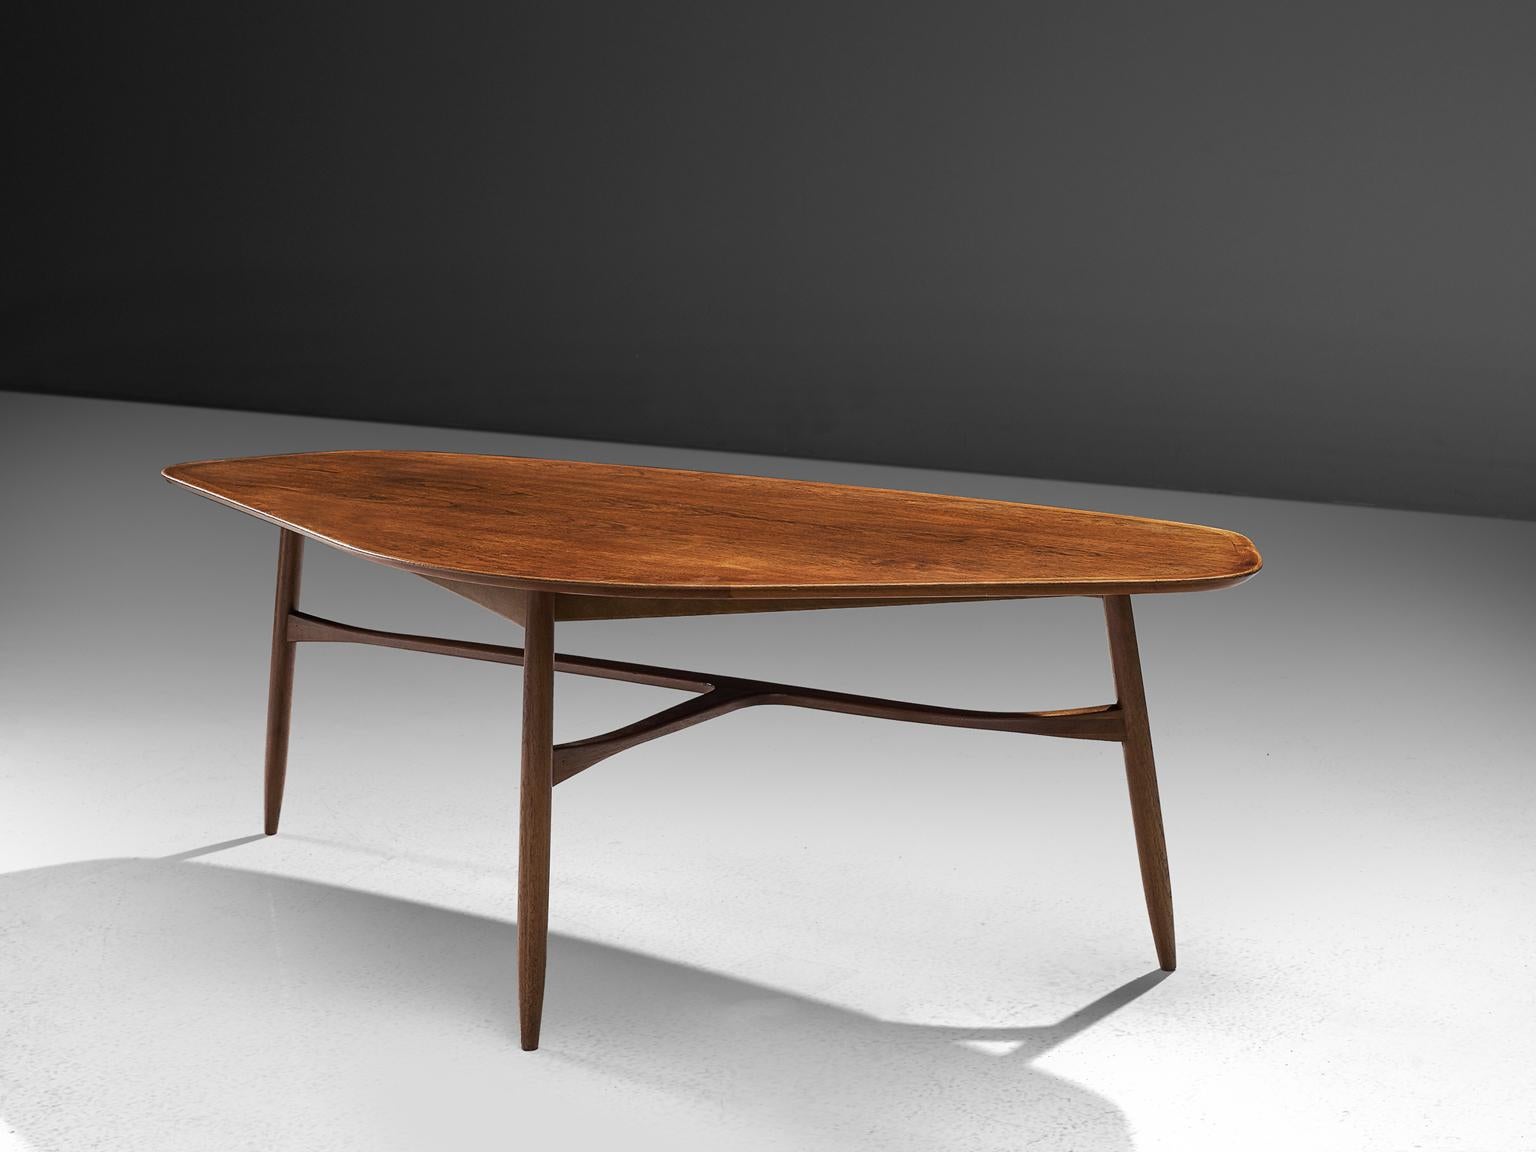 Coffee table, teak, Denmark, 1950s. 

This freely shaped coffee table with three thin tapered legs is part of our Scandinavian midcentury design collection. The legs of the table are beautifully shaped and show high attention to detail, especially